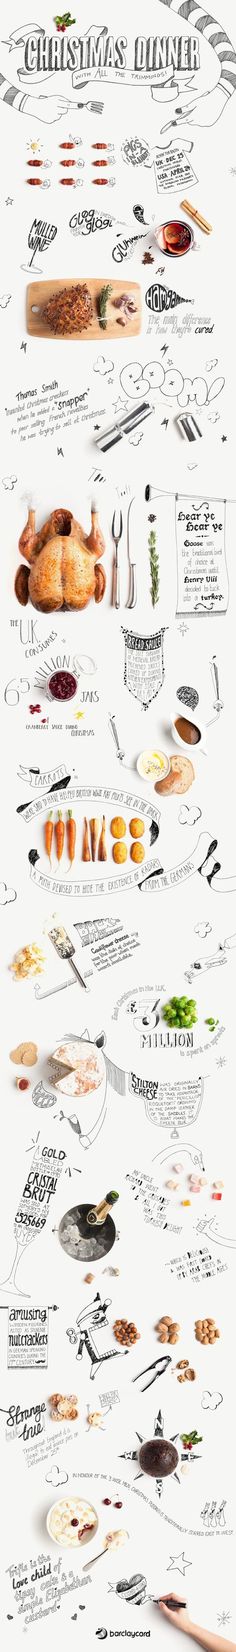 Illustrated by Laura Hunter #illustration #photography #food